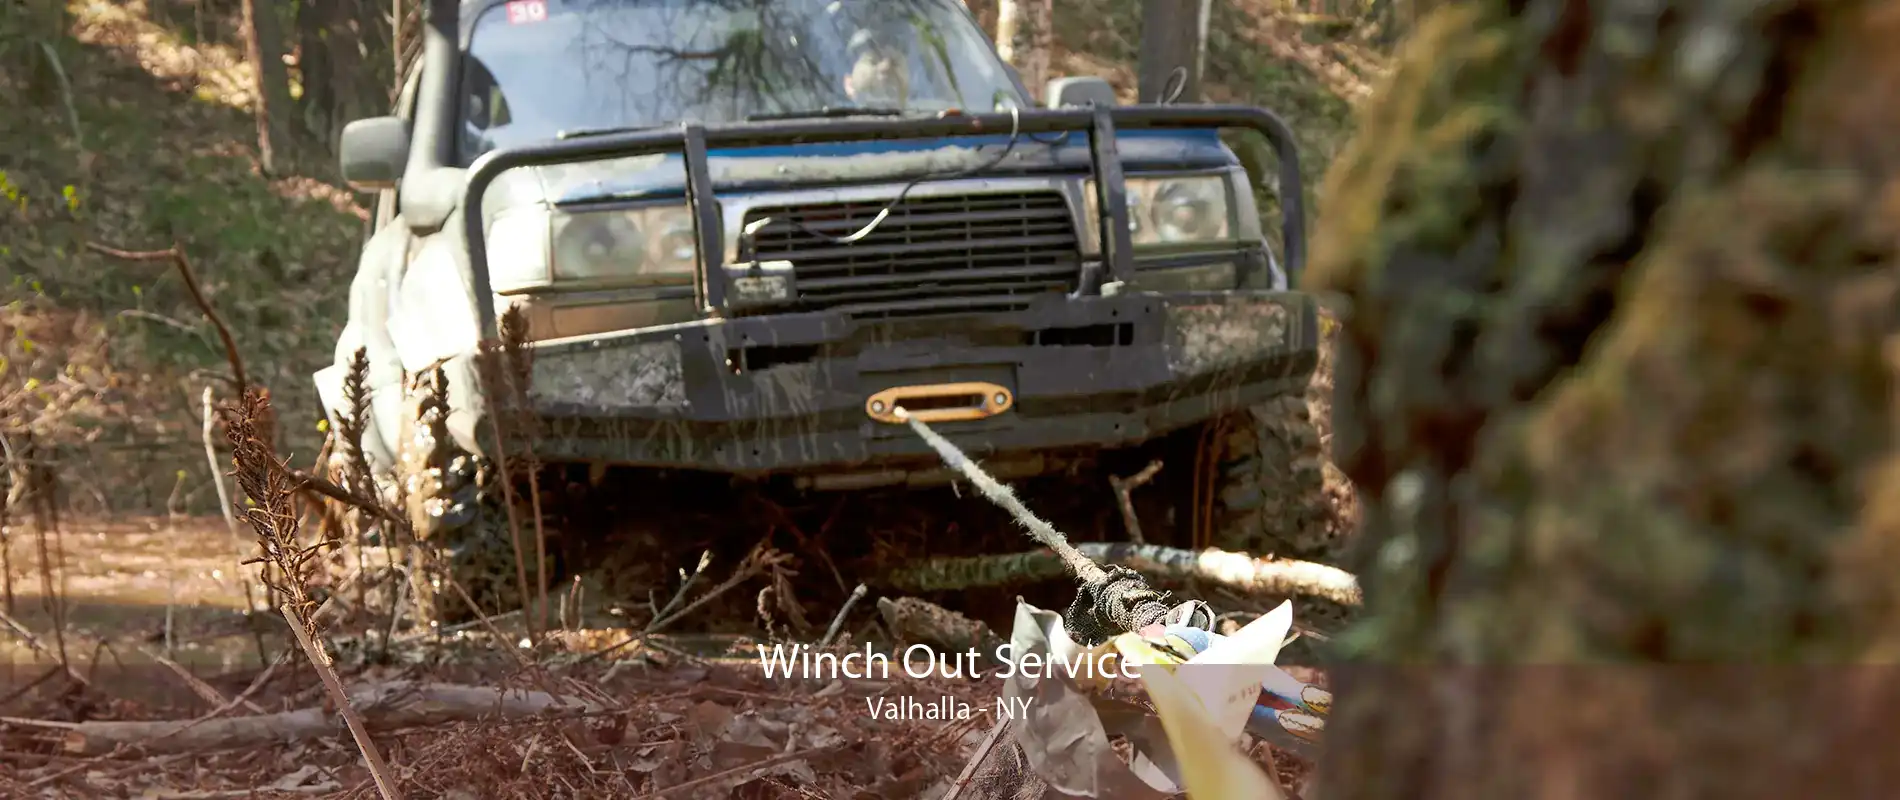 Winch Out Service Valhalla - NY